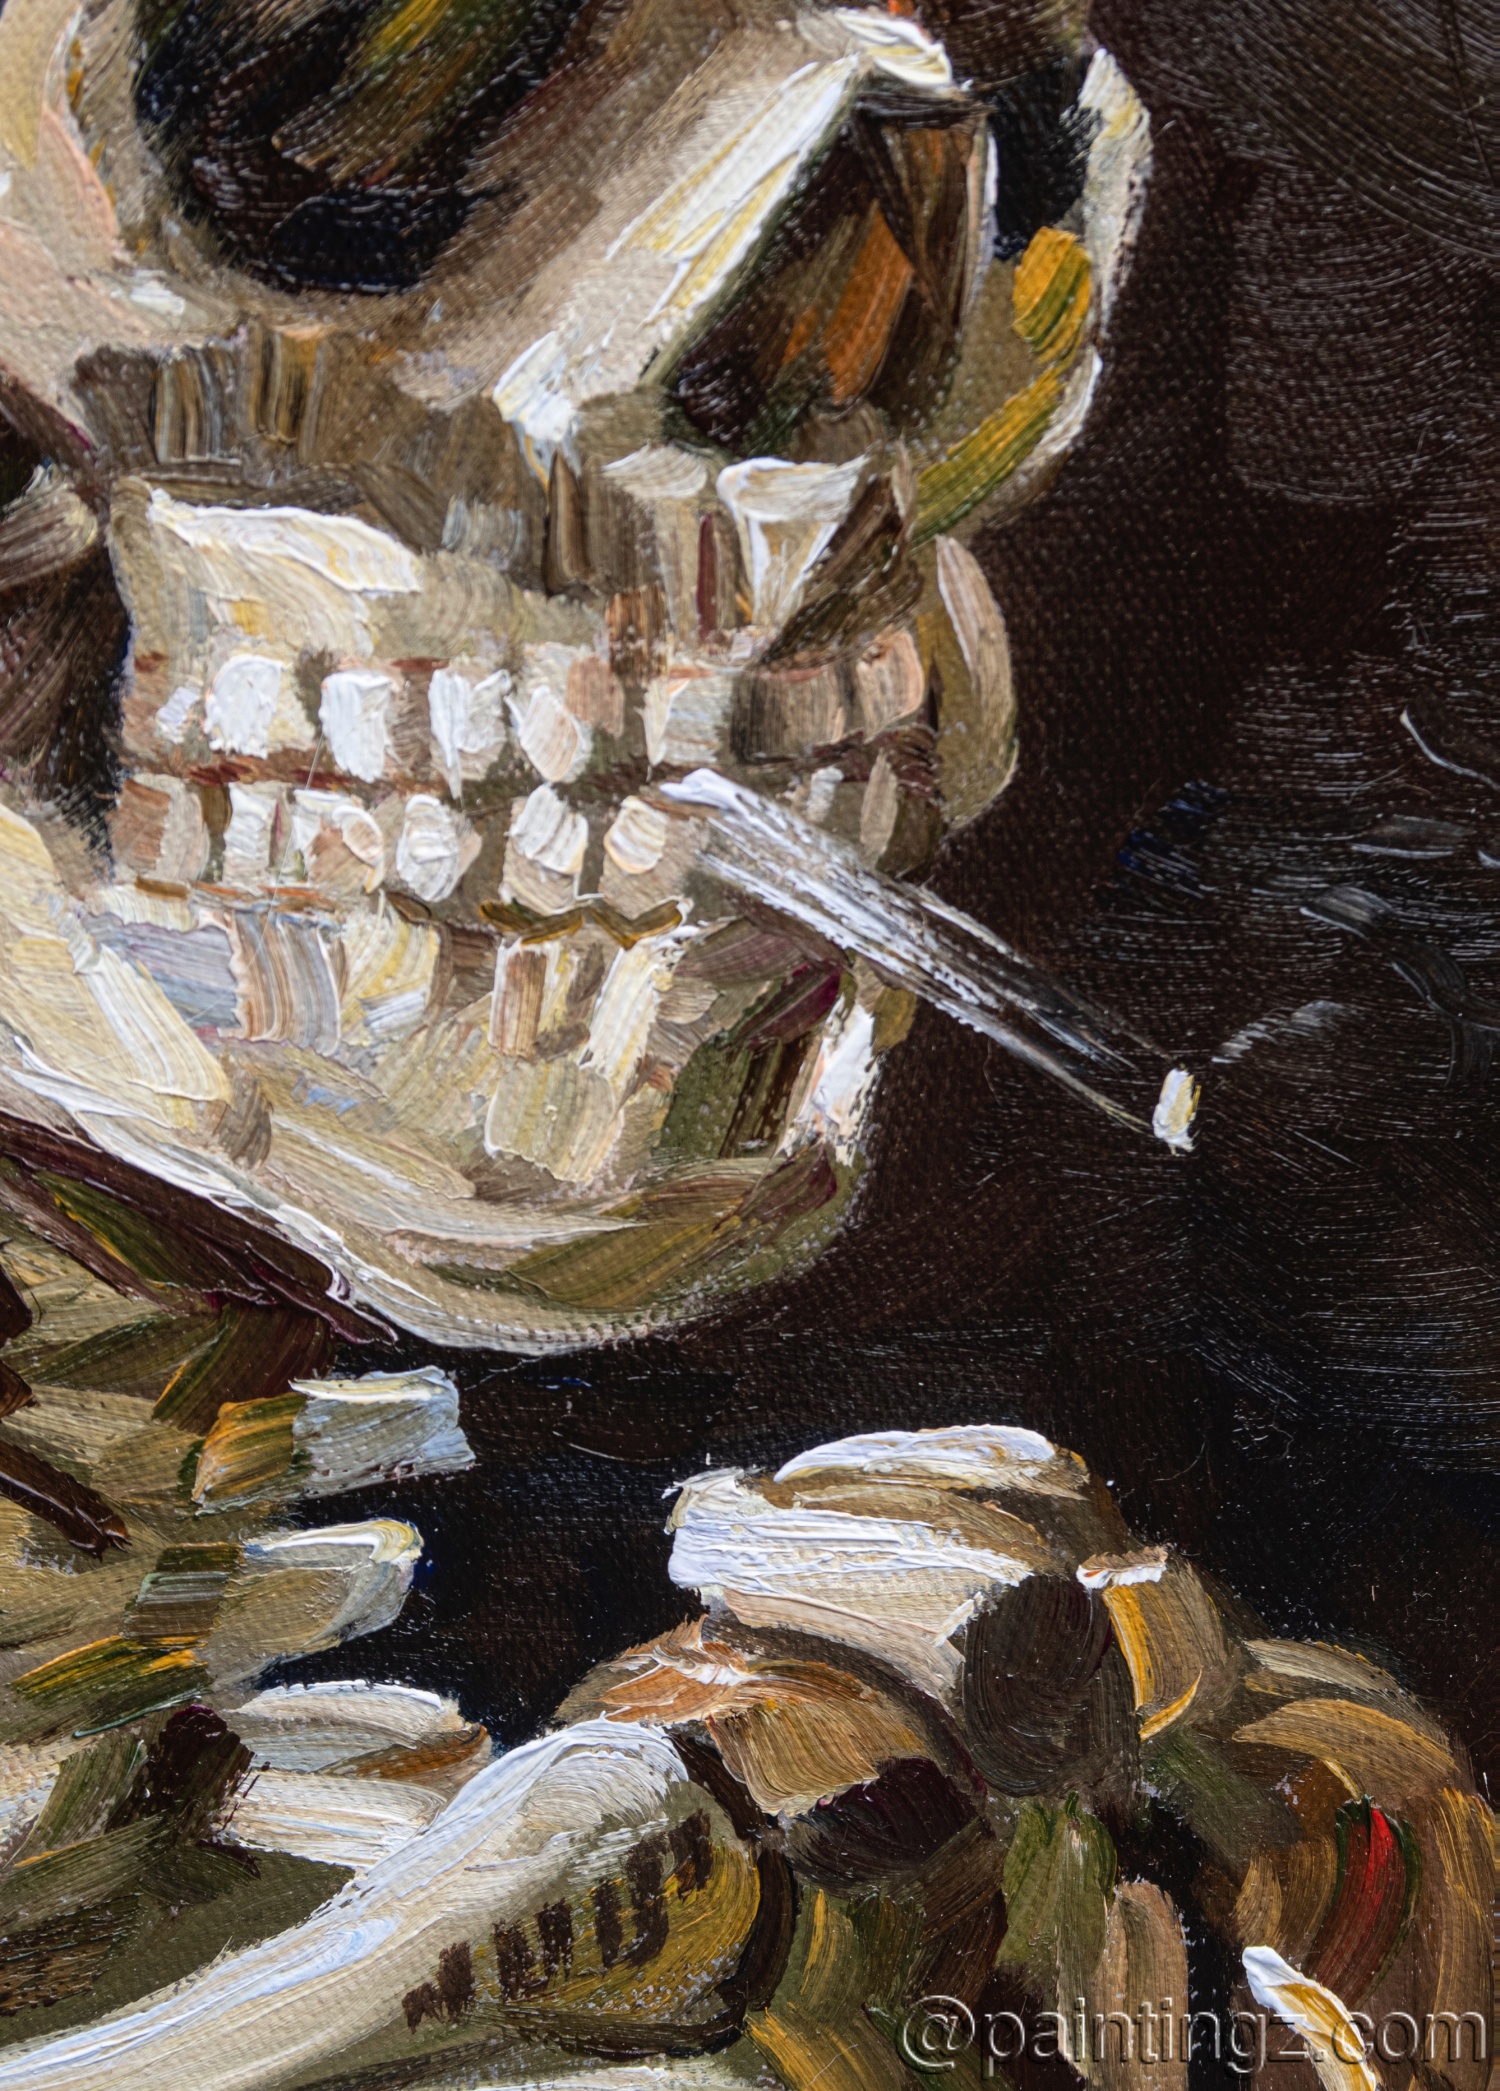 Details in the Reproduction Painting of Head of a Skeleton with a Burning Cigarette